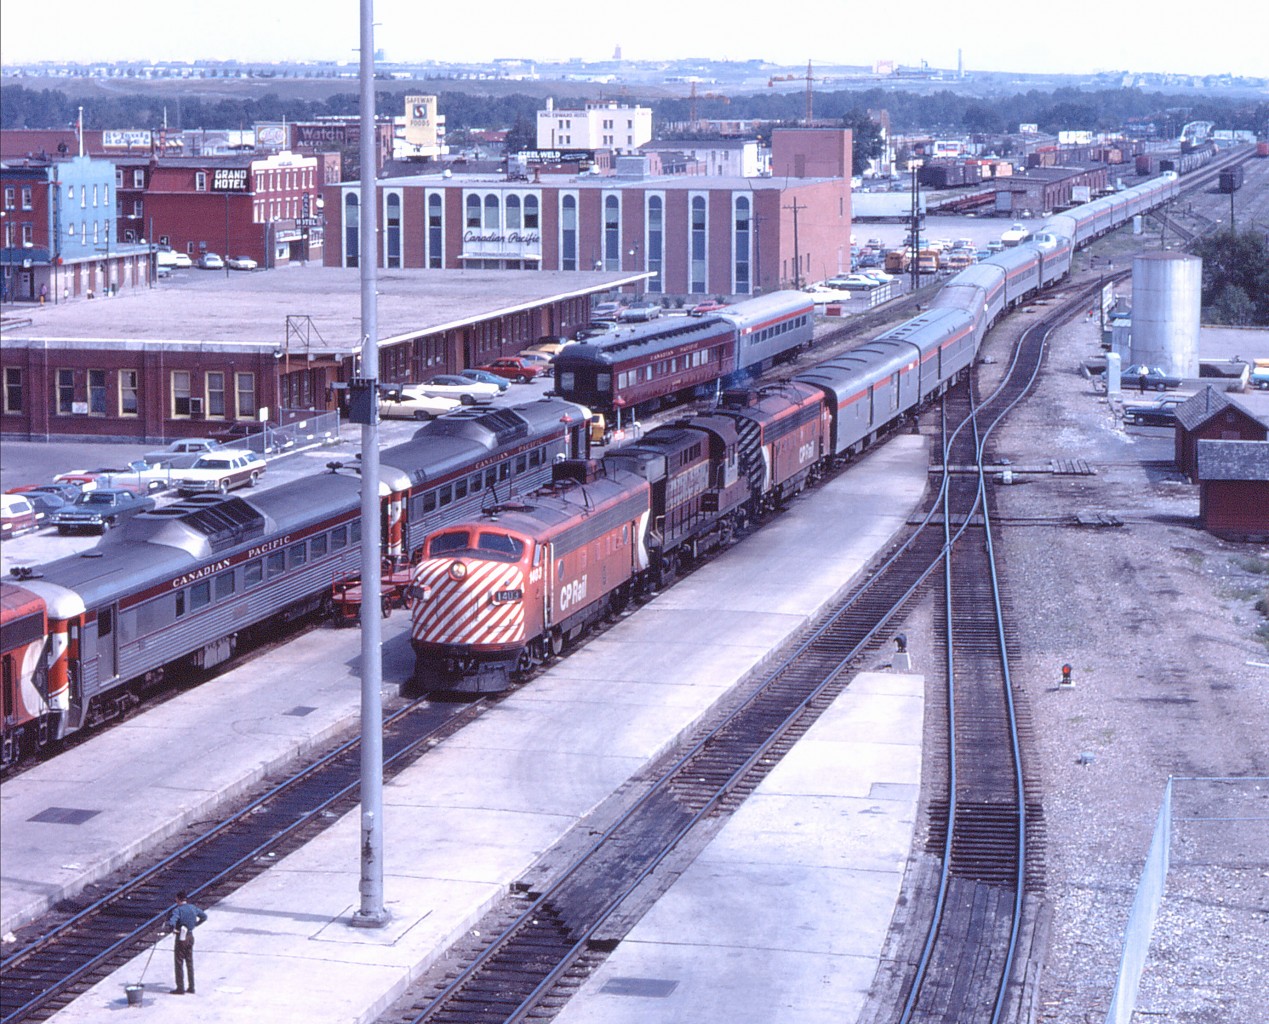 "CP Rail Train No. 1, The Canadian, is now arriving from `Regina, Winnipeg, Thunder Bay, Sudbury, Toronto and Montreal". If on time, No. 1 arrived in Calgary at 1305 and would depart at 1340, with ultimate arrival in Vancouver at 1010 the next morning. (Eastbound, The Canadian had a scheduled 1435 arrival and 1510 departure in the summer of 1971.) This timing permitted connections with train numbers 302 (departing Edmonton at 0830 and arriving Calgary at 1210), 301 (departing Calgary at 1600 for Edmonton, arriving at 1940), 310/312 for Lethbridge (departing at 1610 and arriving at 1850; 3 days/week via Fort McLeod and 4 days/week via Coalhurst), and 309/311 departing Lethbridge at 1000 and arriving Calgary at 1240 (also 3 days/week via Fort McLeod and 4 days/week via Coalhurst)--note the two Budd RDCs to the north of the inbound train. FP7 1403 leads a steam generator equipped RS10 and another FP7 with a "summer" sized consist. I'm sure everyone looking at this photo would love to race down to the station concourse to buy a ticket for the West Coast if we could!